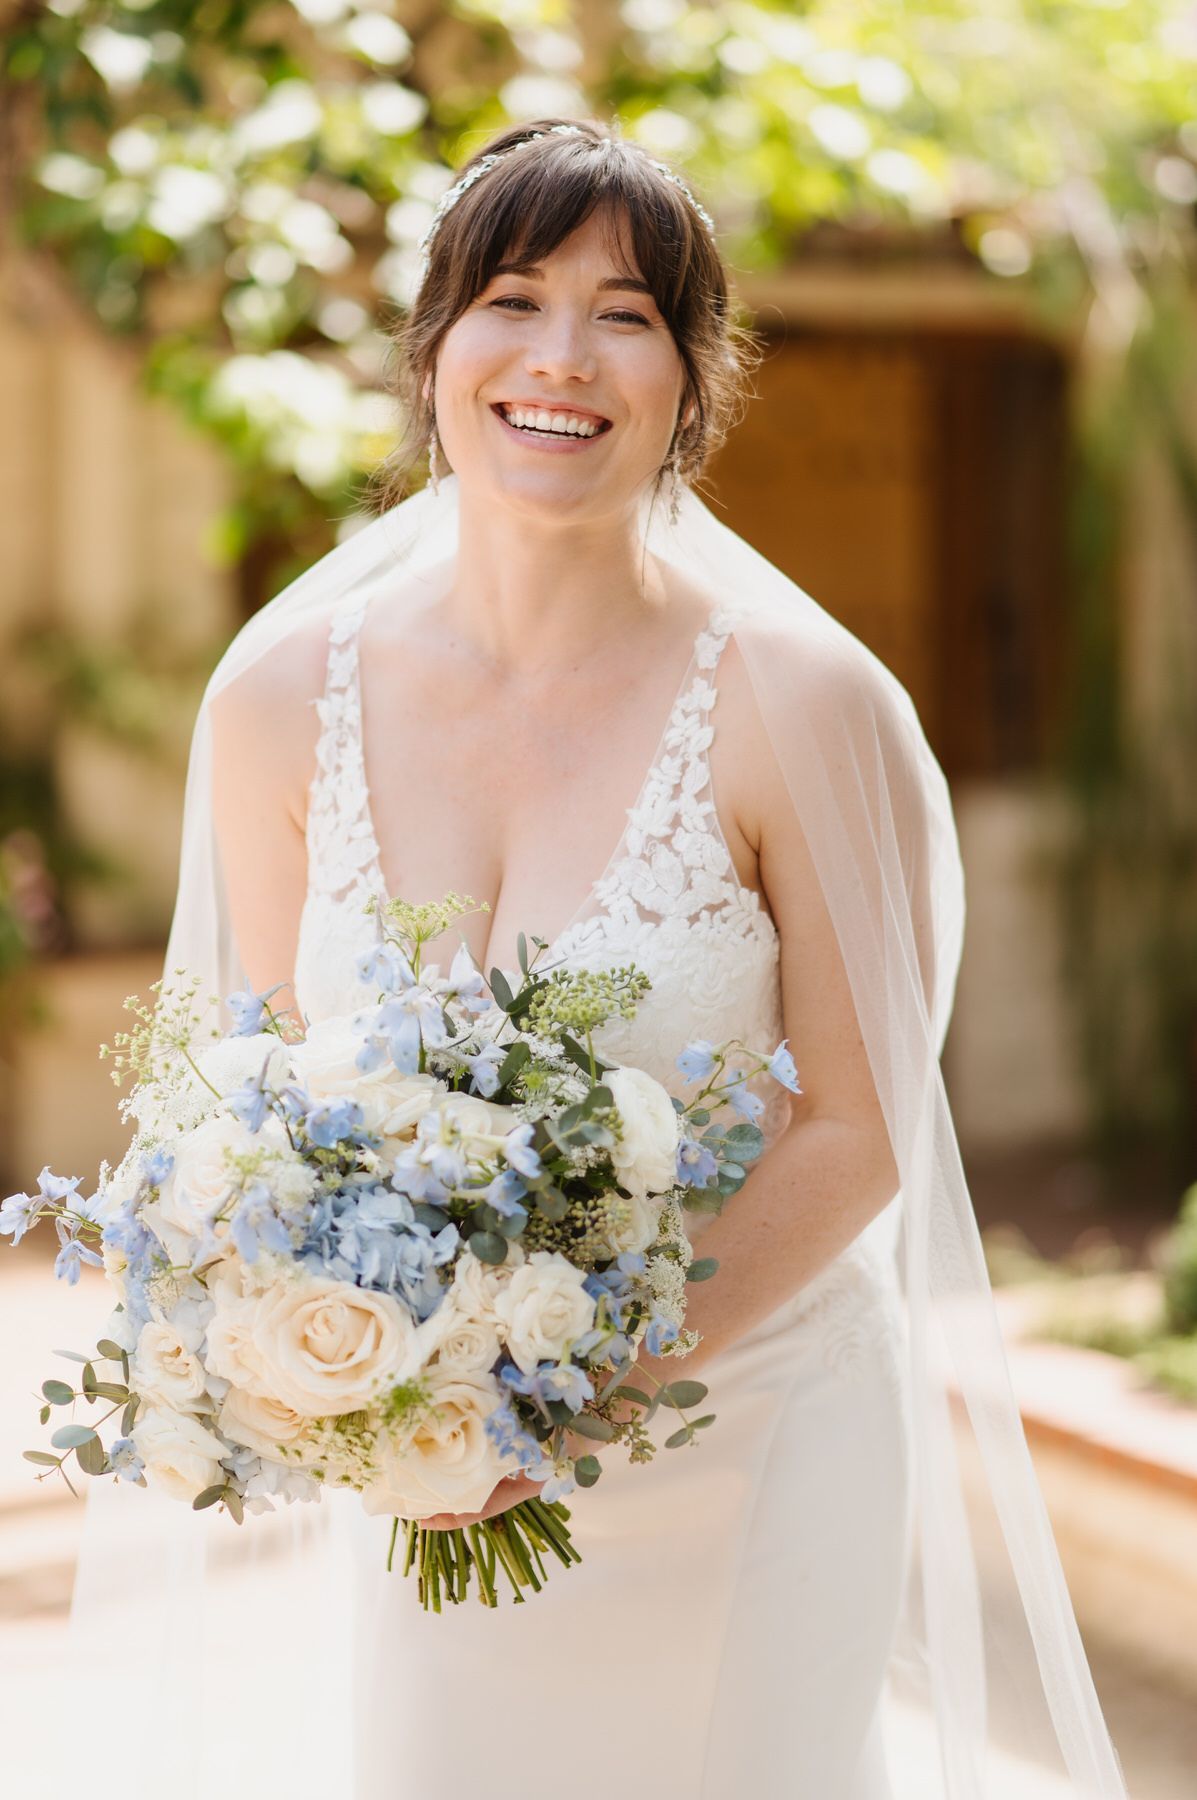 A bride in a white dress and veil is holding a bouquet of blue and white flowers.